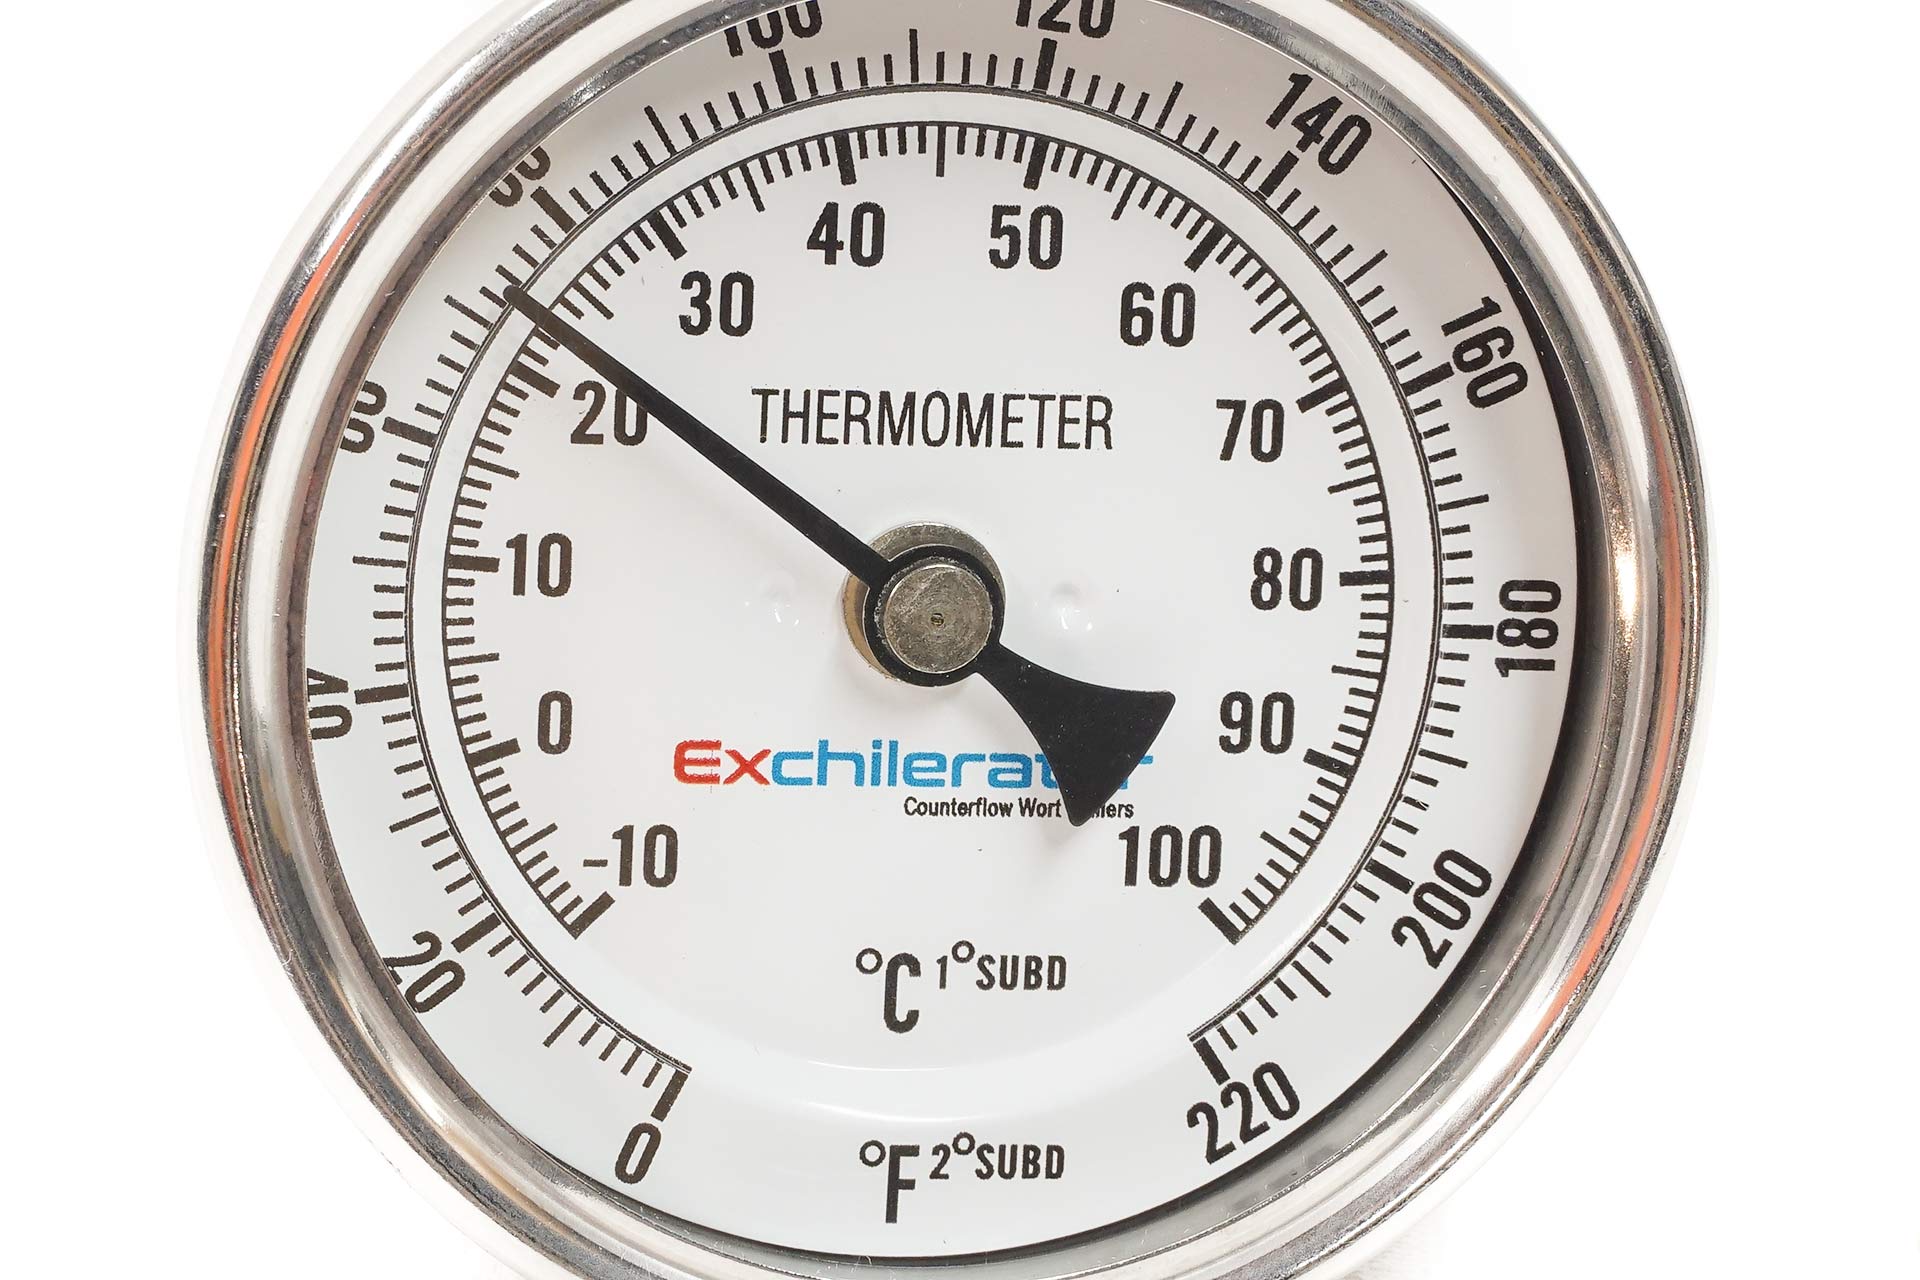 Large Dial Brewing Thermometer